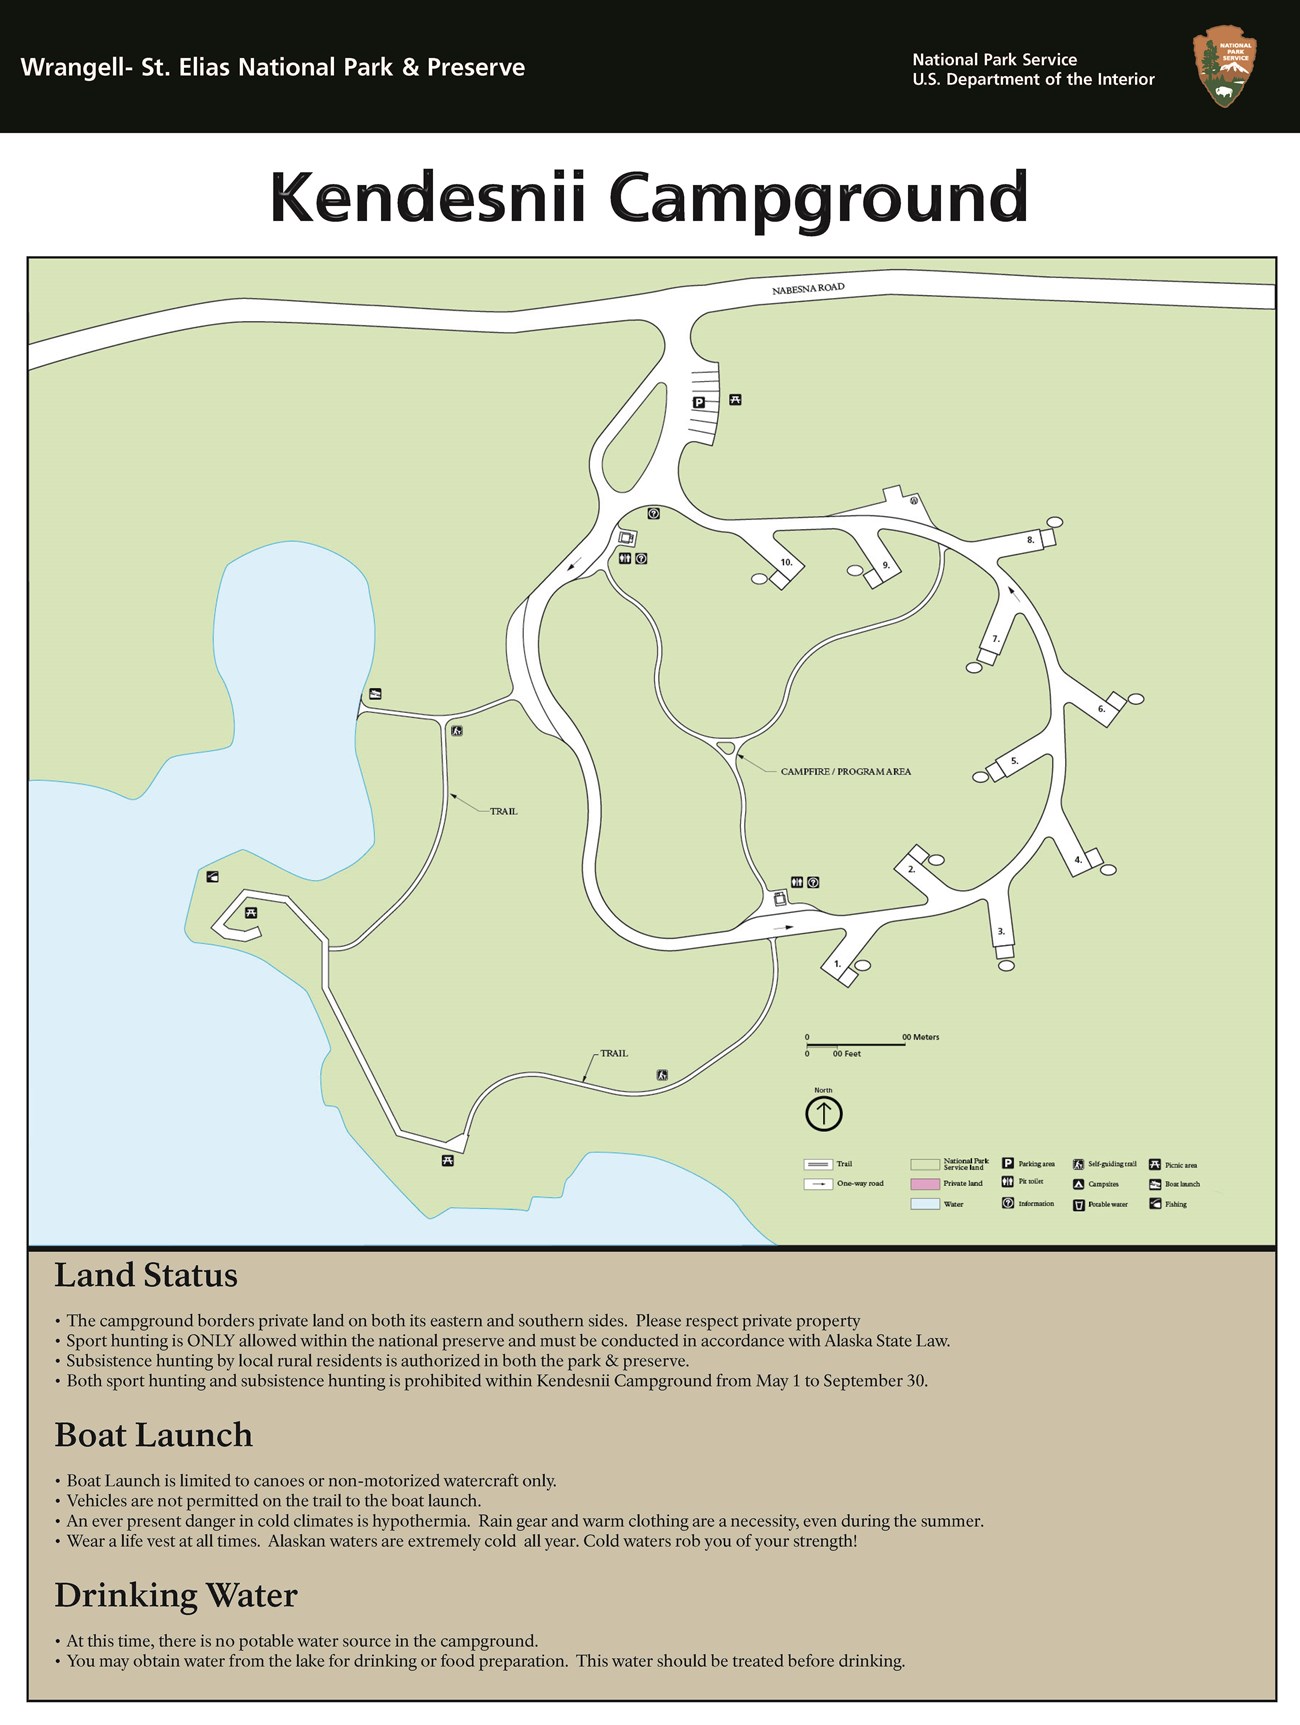 Kendesnii Campground Map